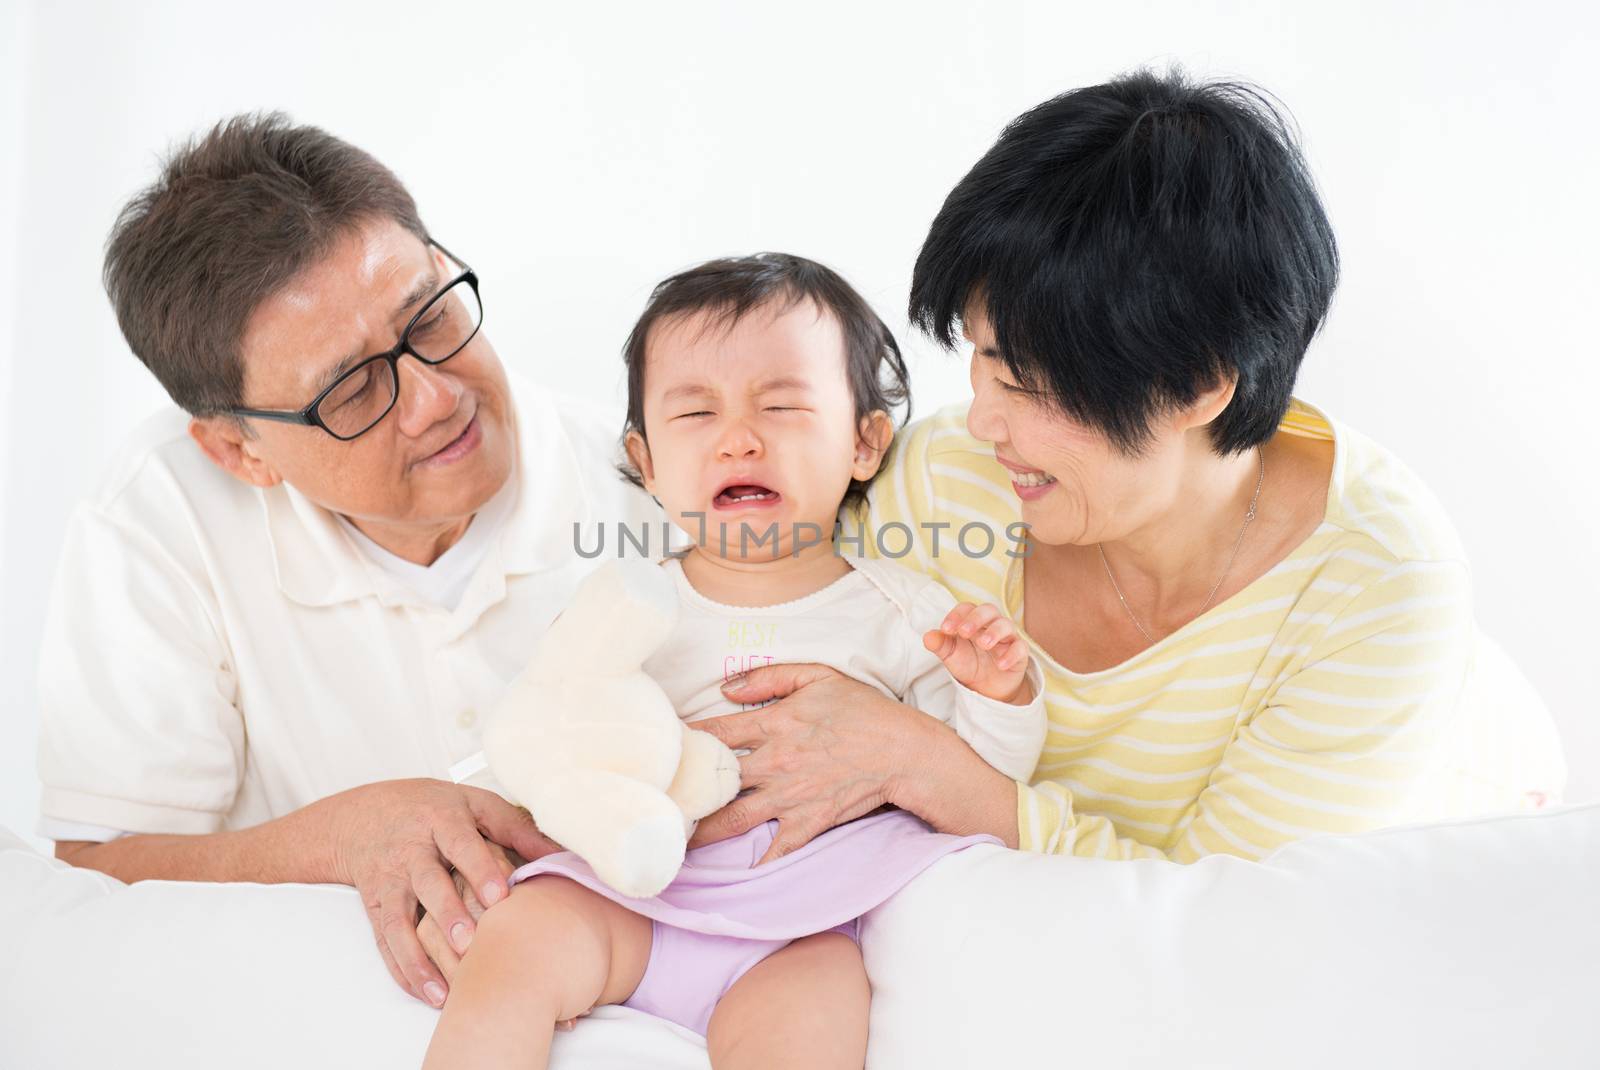 Asian family pamper crying baby girl, grandparents and grandchild indoor living lifestyle at home.